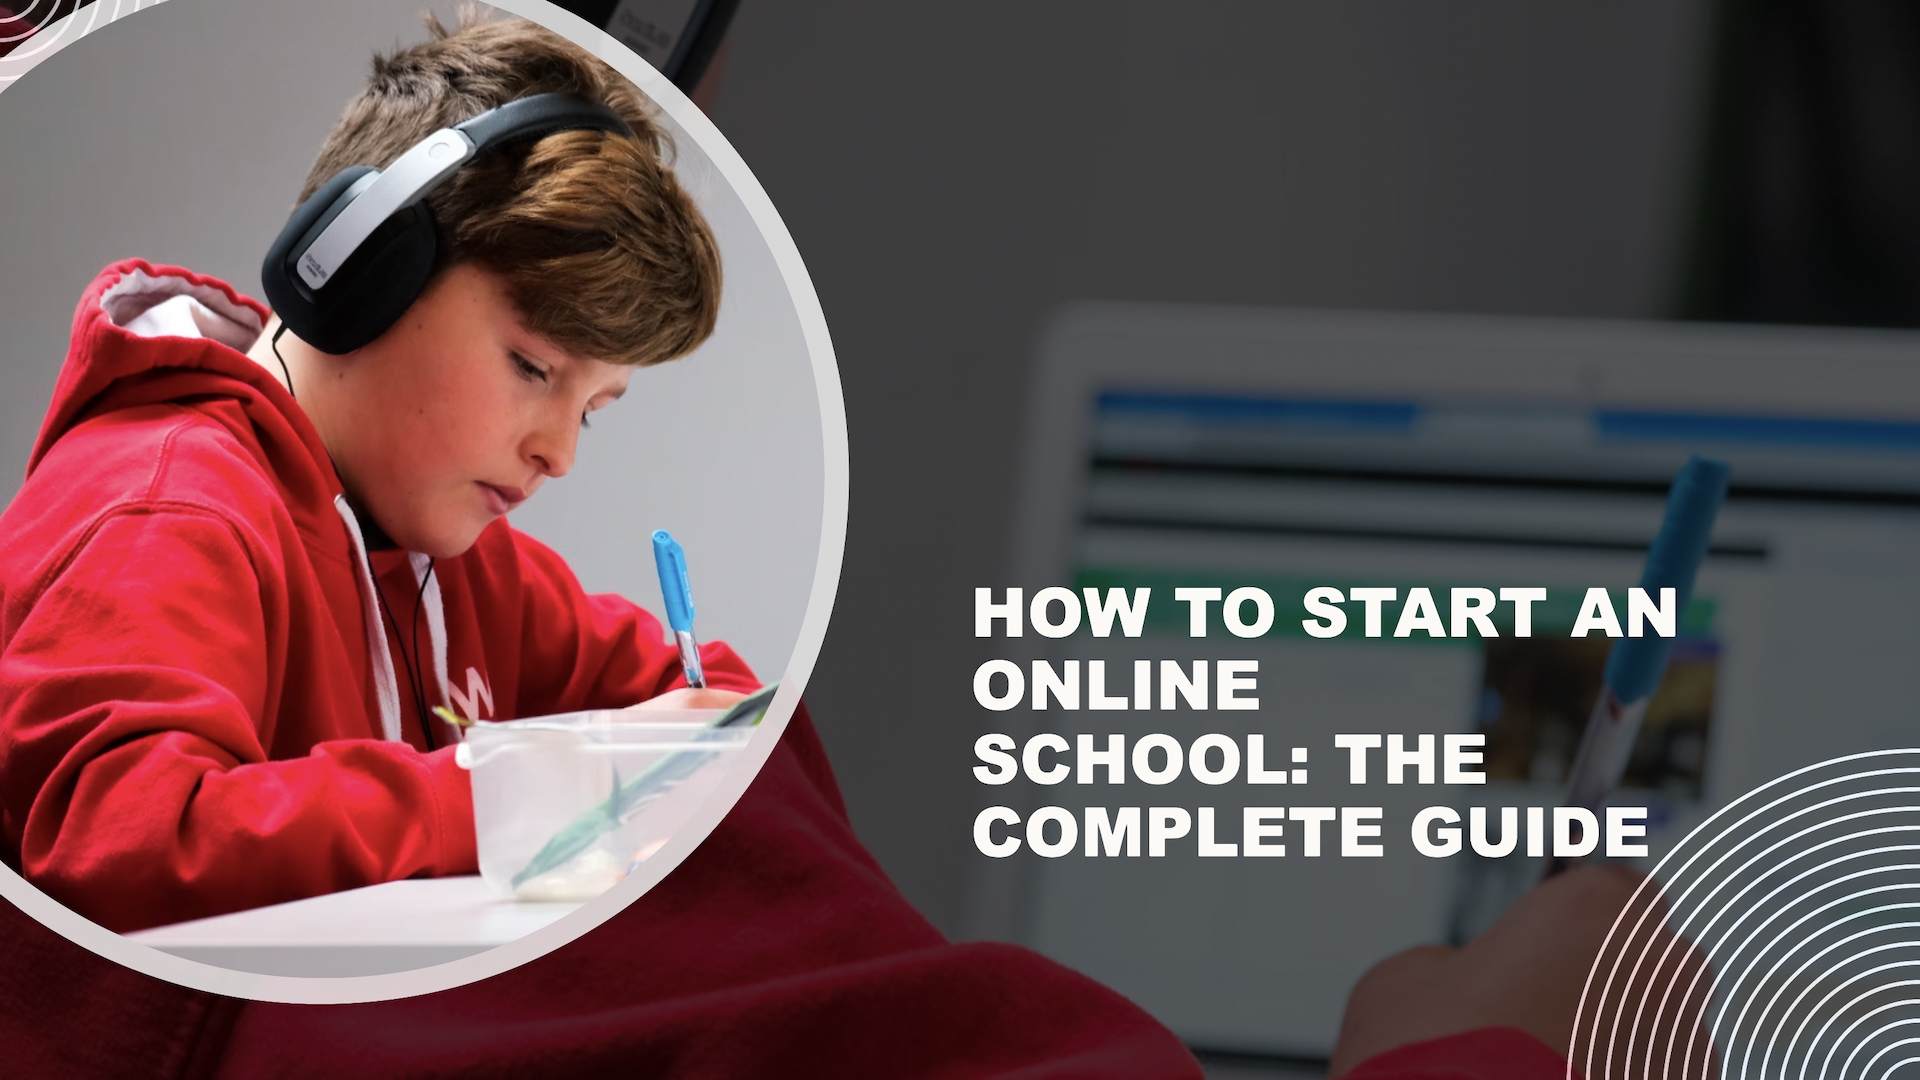 HOW TO START AN ONLINE SCHOOL: THE COMPLETE GUIDE​